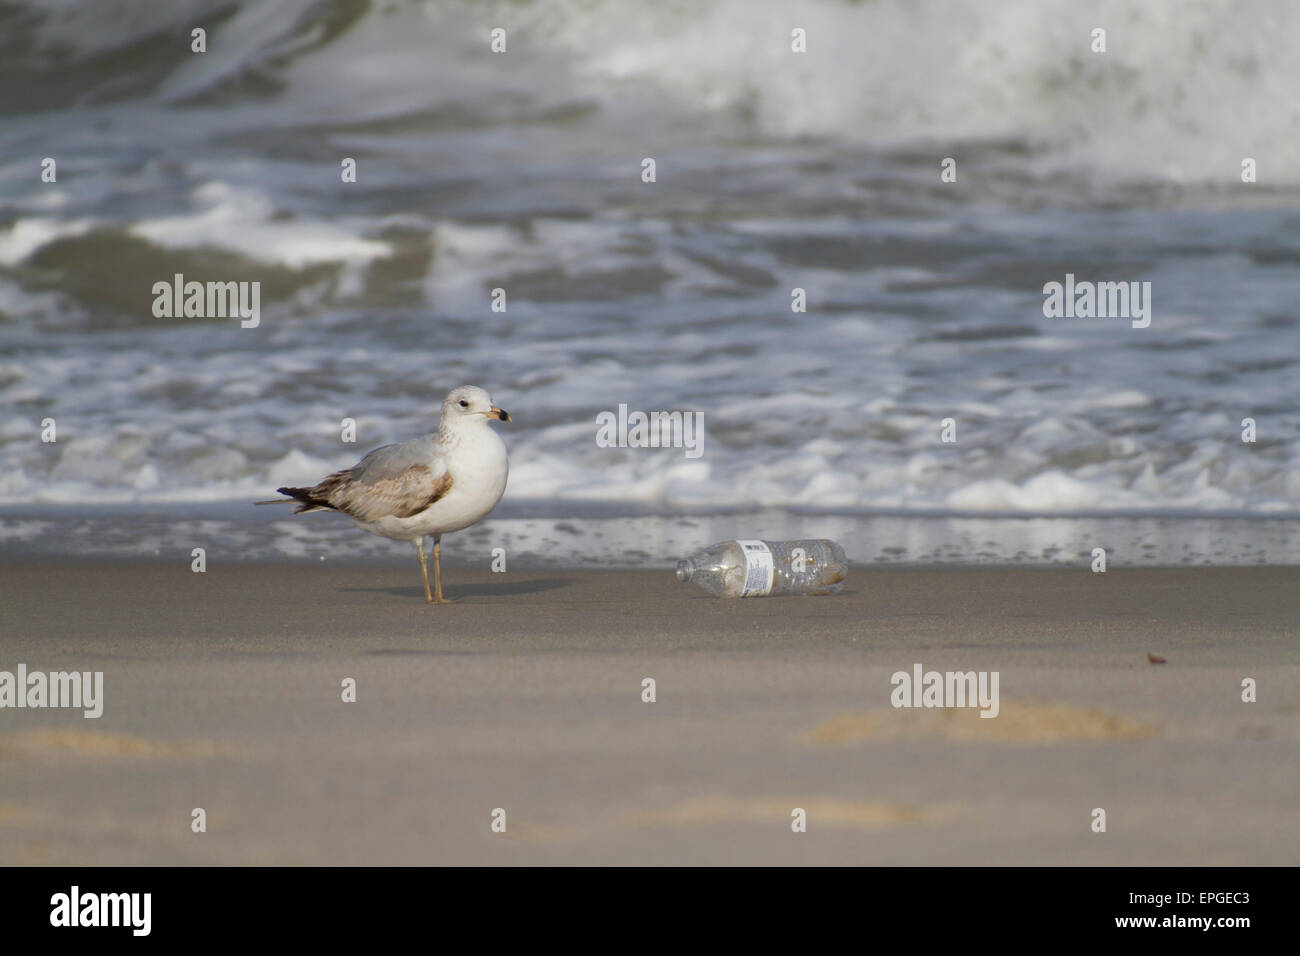 A seagull stands next to a plastic bottle washed up on the beach by the tide Stock Photo